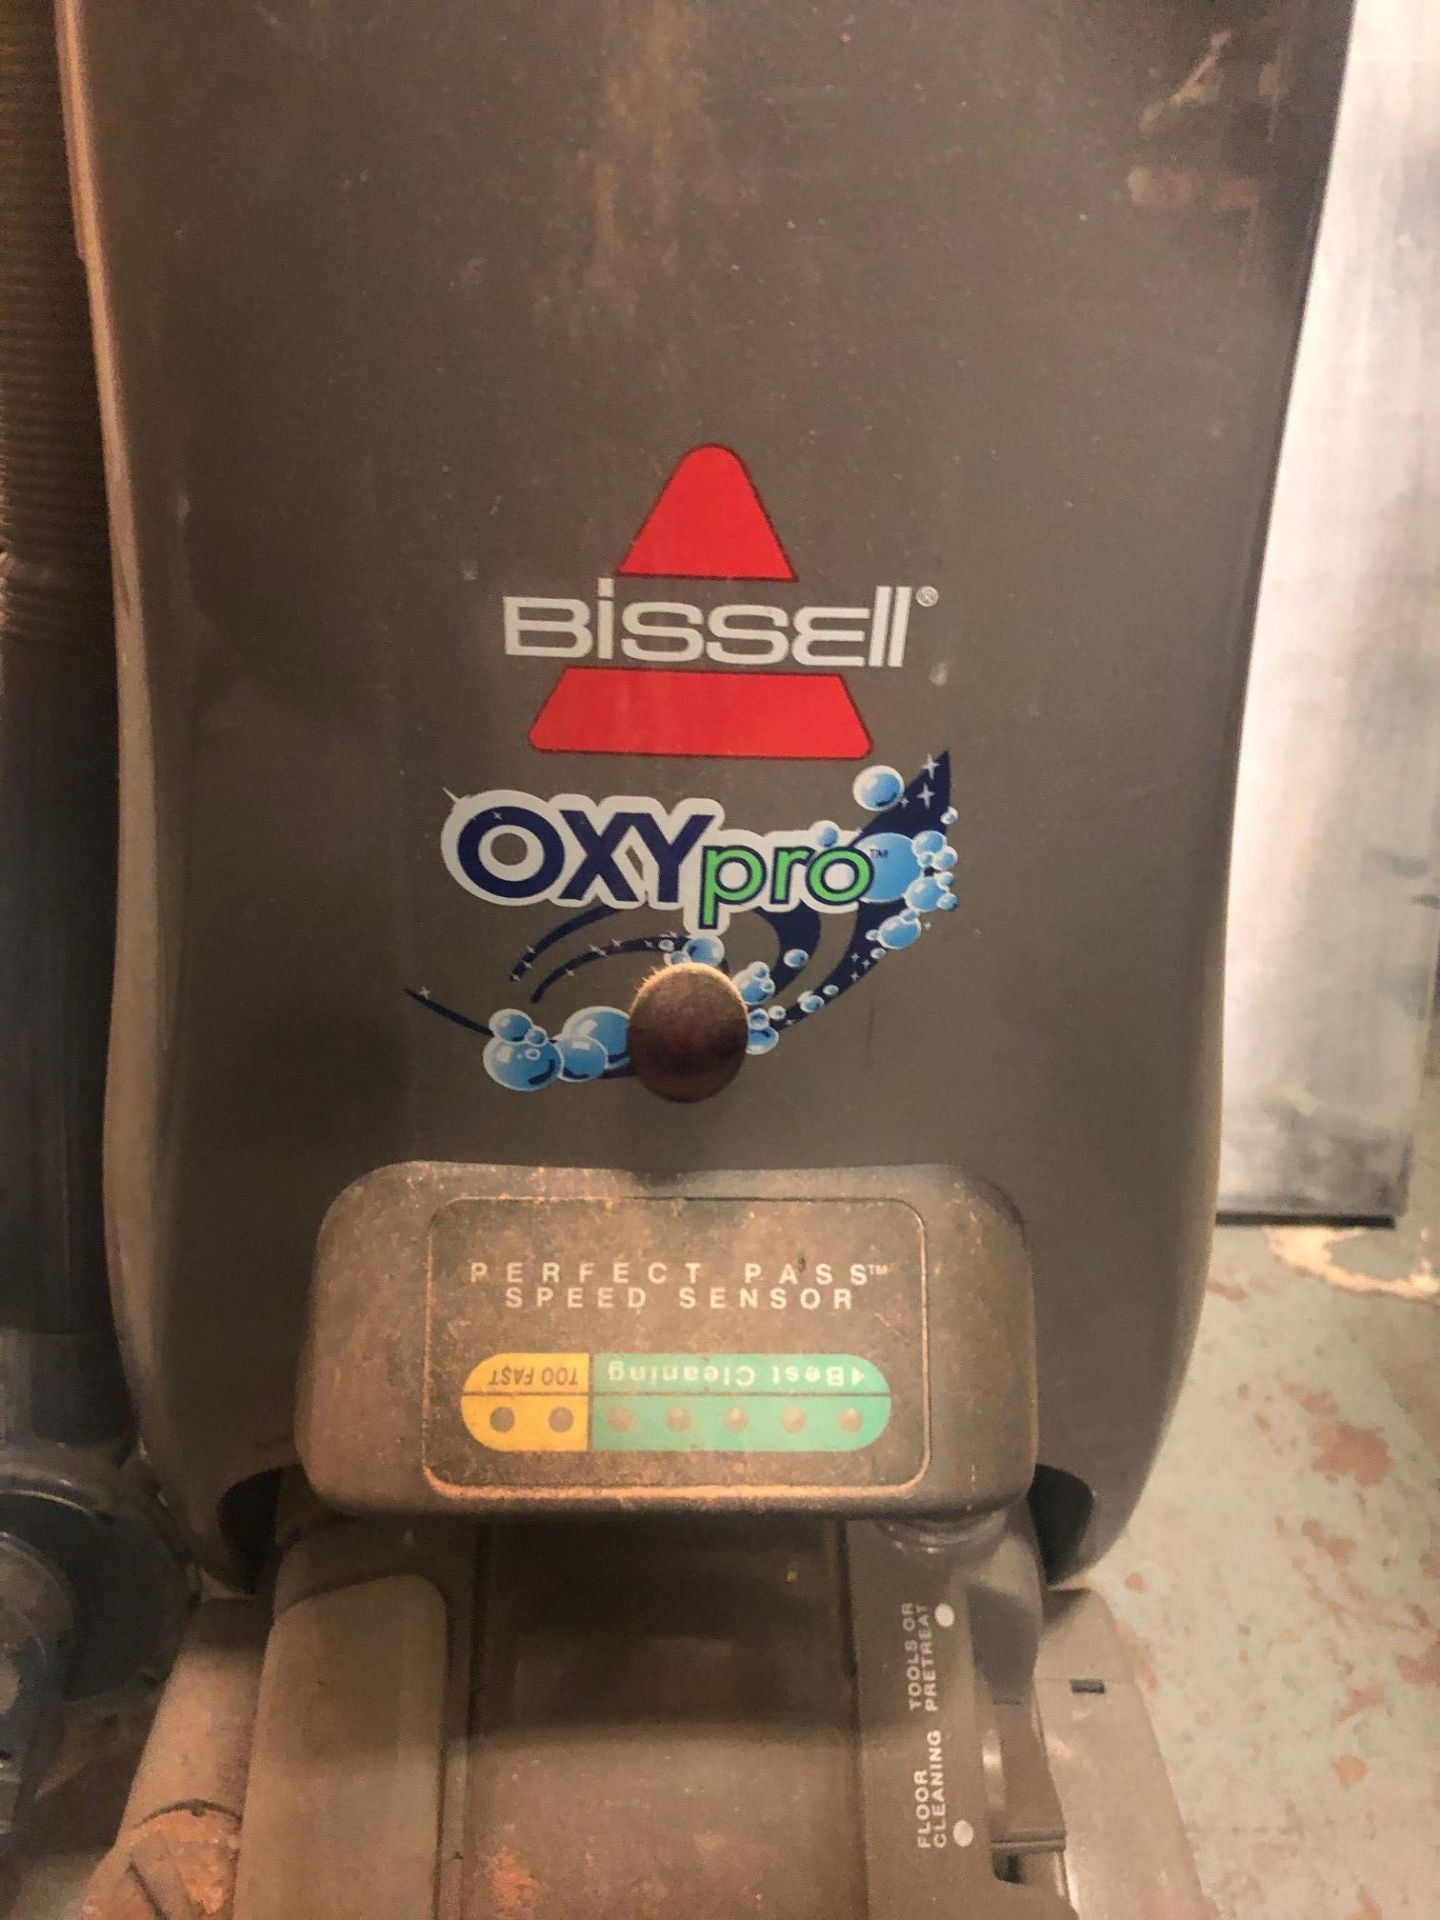 Bissall Oxypro Vacuum Cleaner - Image 2 of 3